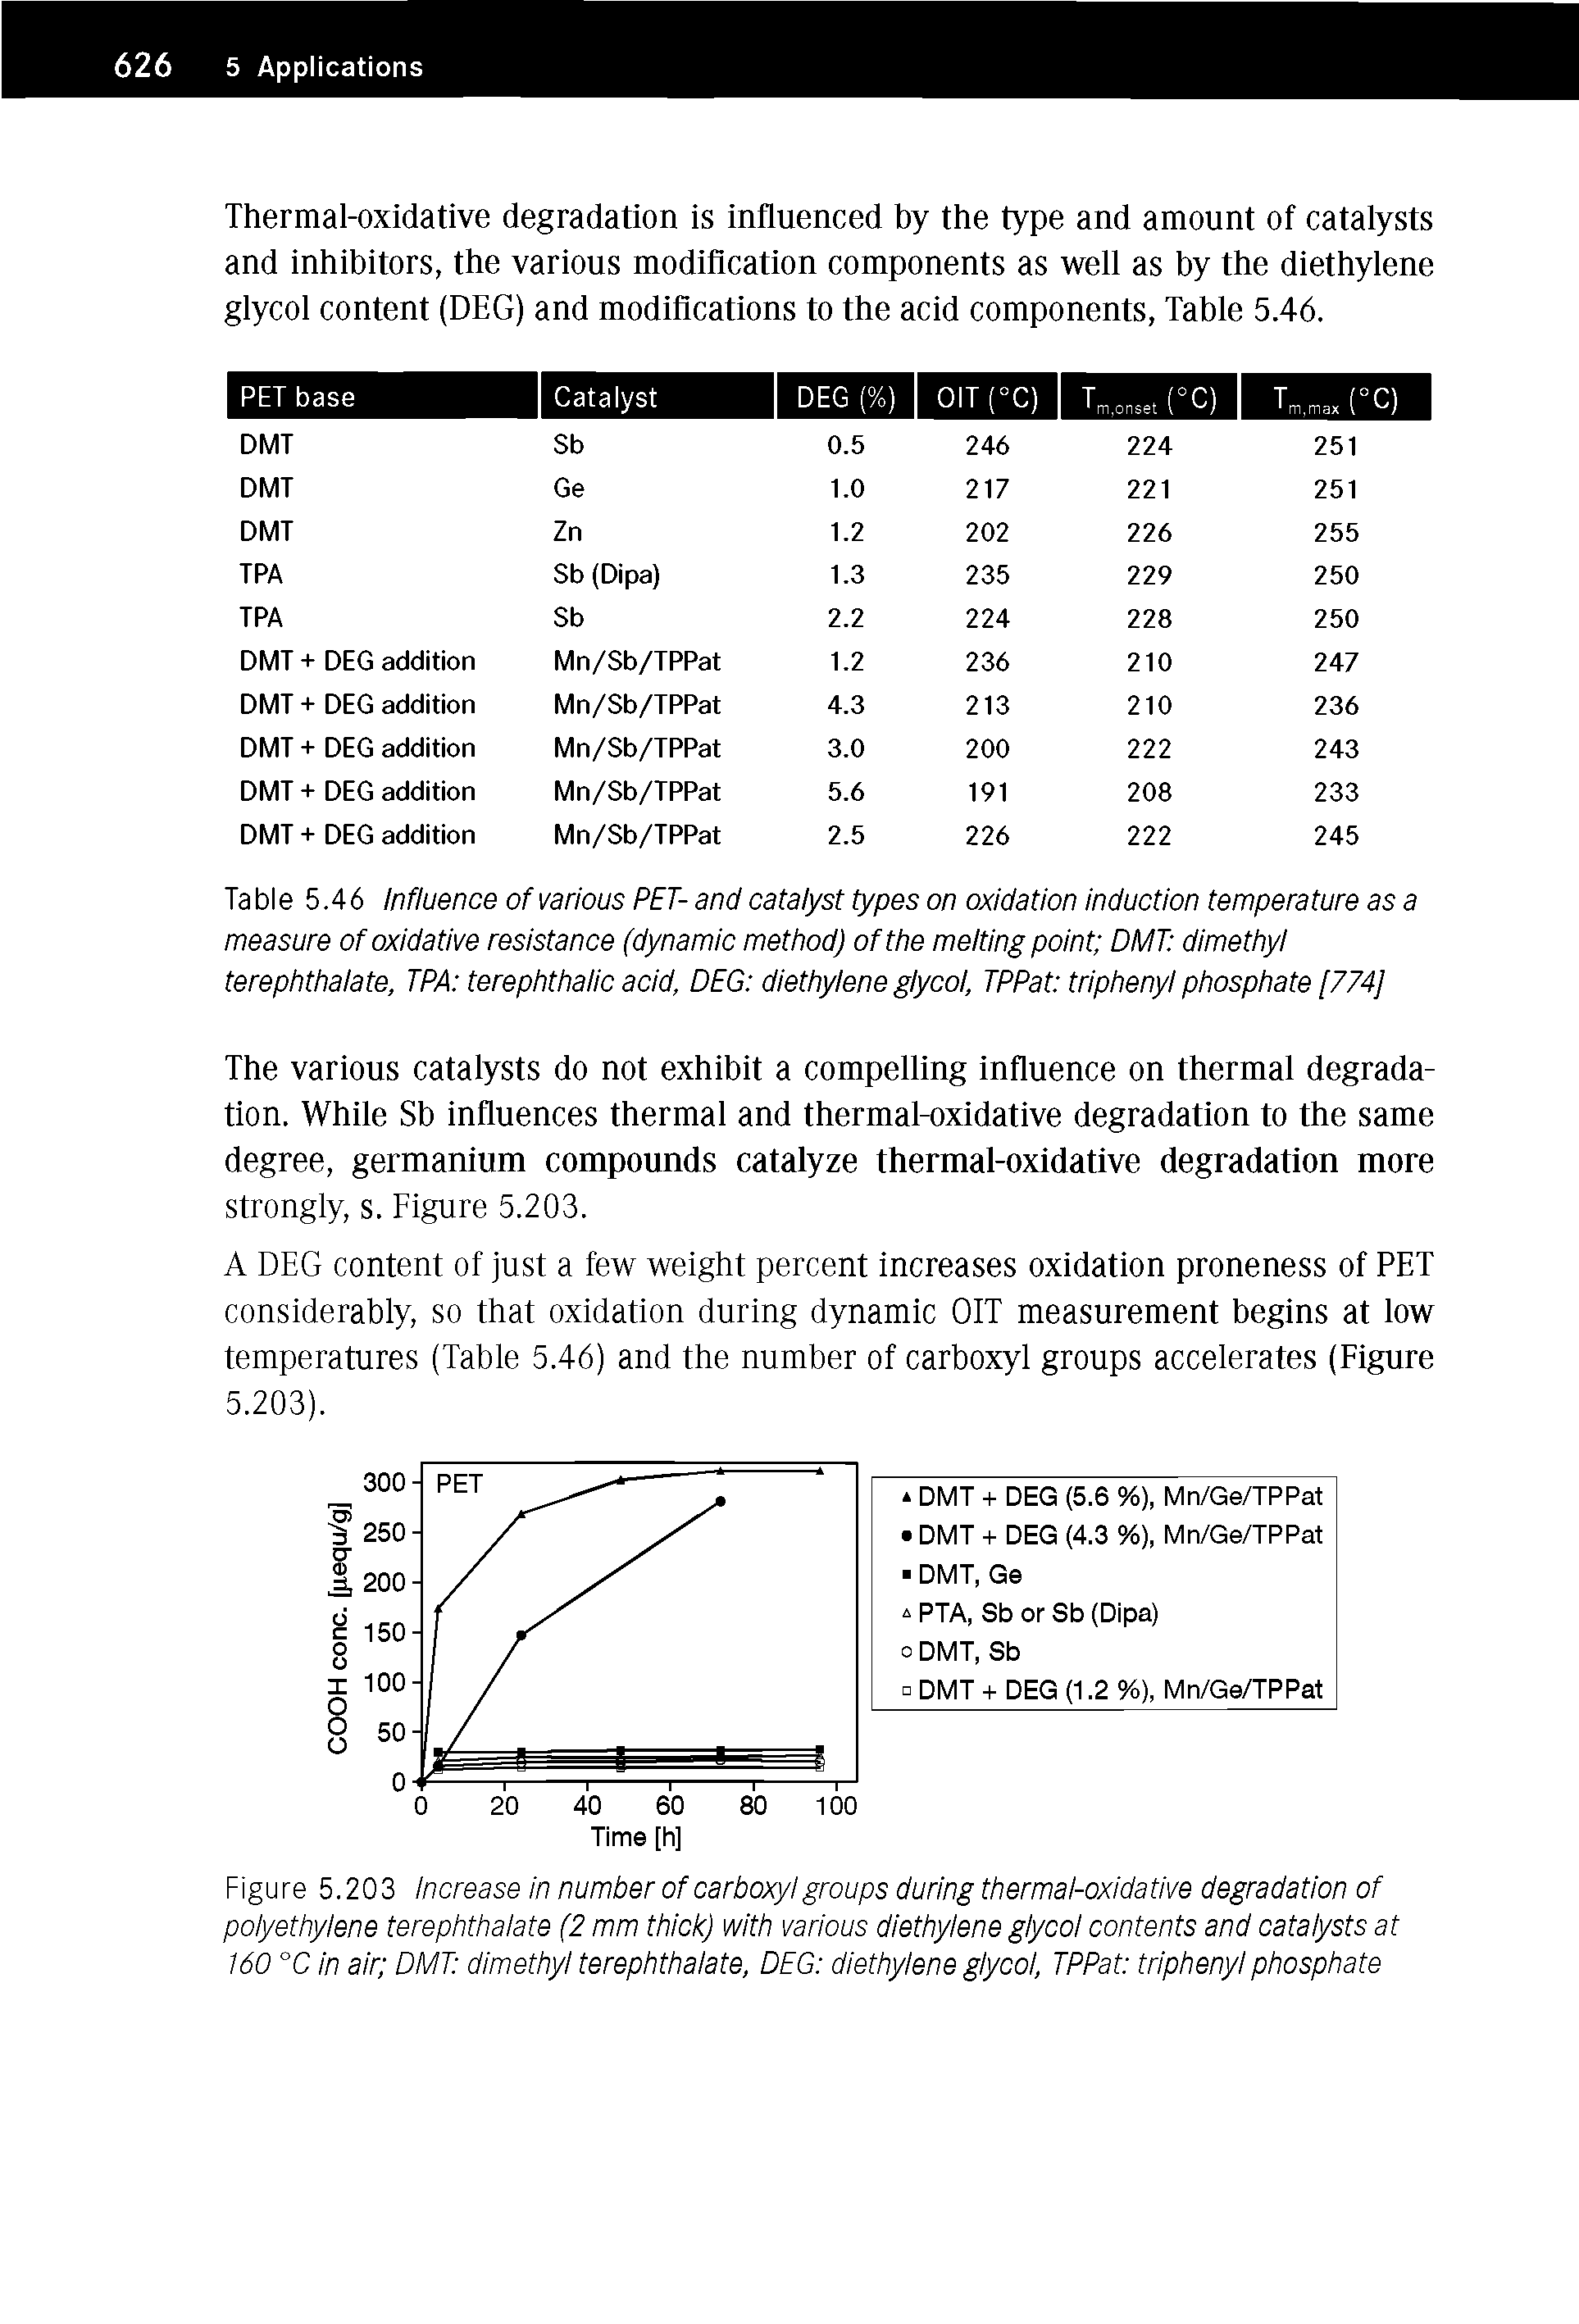 Figure 5.203 Increase in number of carboxyl groups during thermal-oxidative degradation of polyethylene terephthalate (2 mm thick) with various diethylene glycol contents and catalysts at 160 °C in air DMT dimethyl terephthalate, DEG diethylene glycol, TPPat triphenyl phosphate...